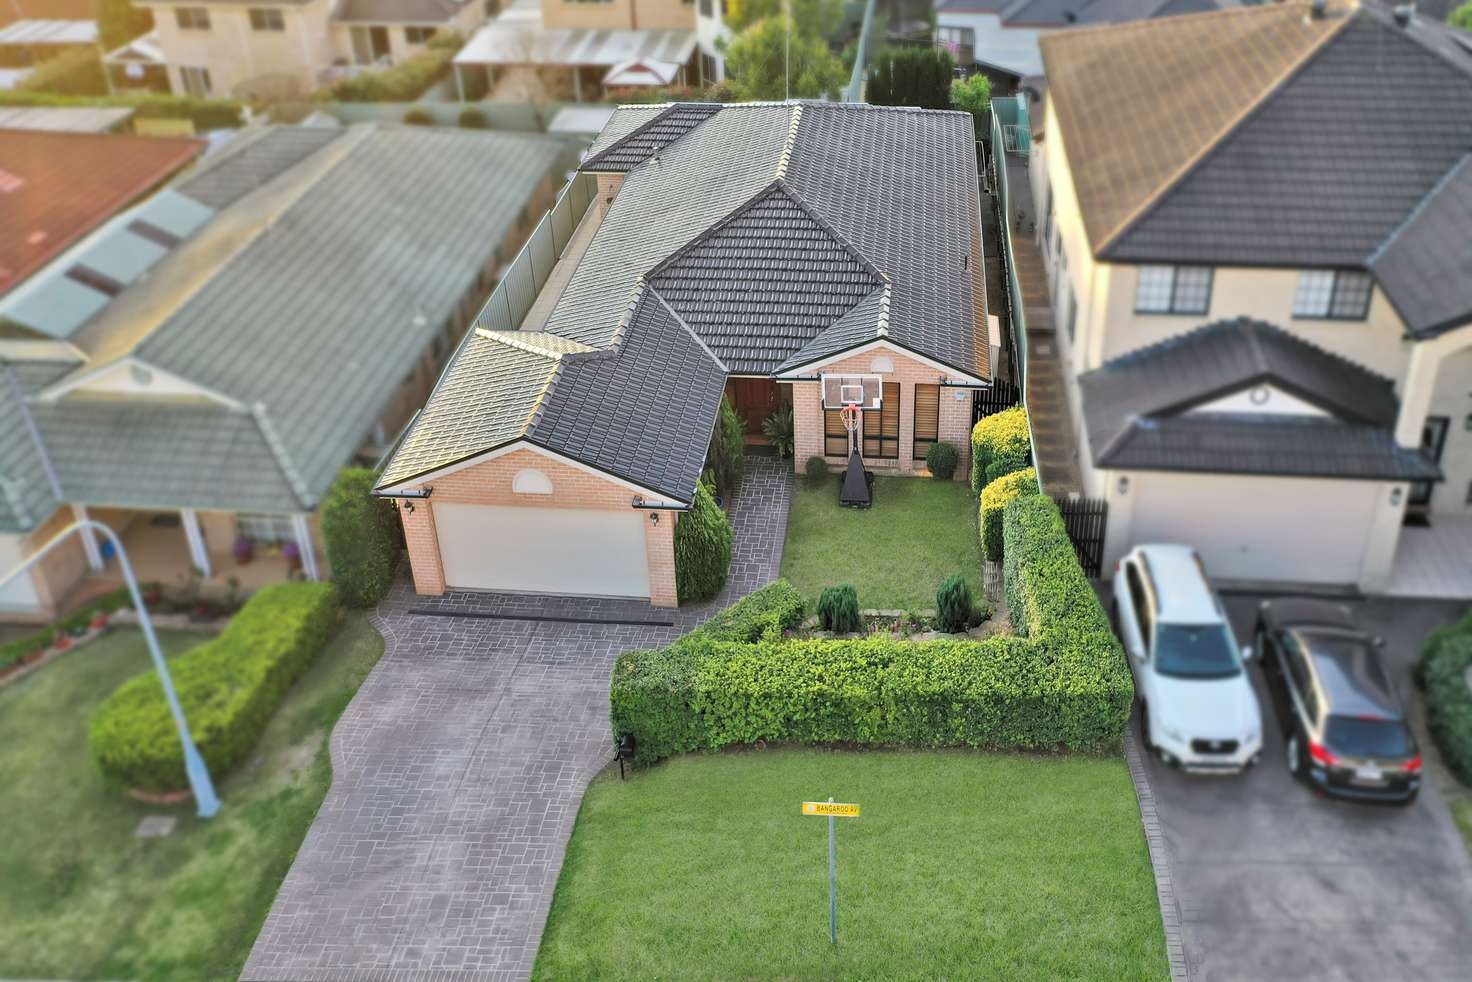 Main view of Homely house listing, 11 Bangaroo Avenue, Glenmore Park NSW 2745